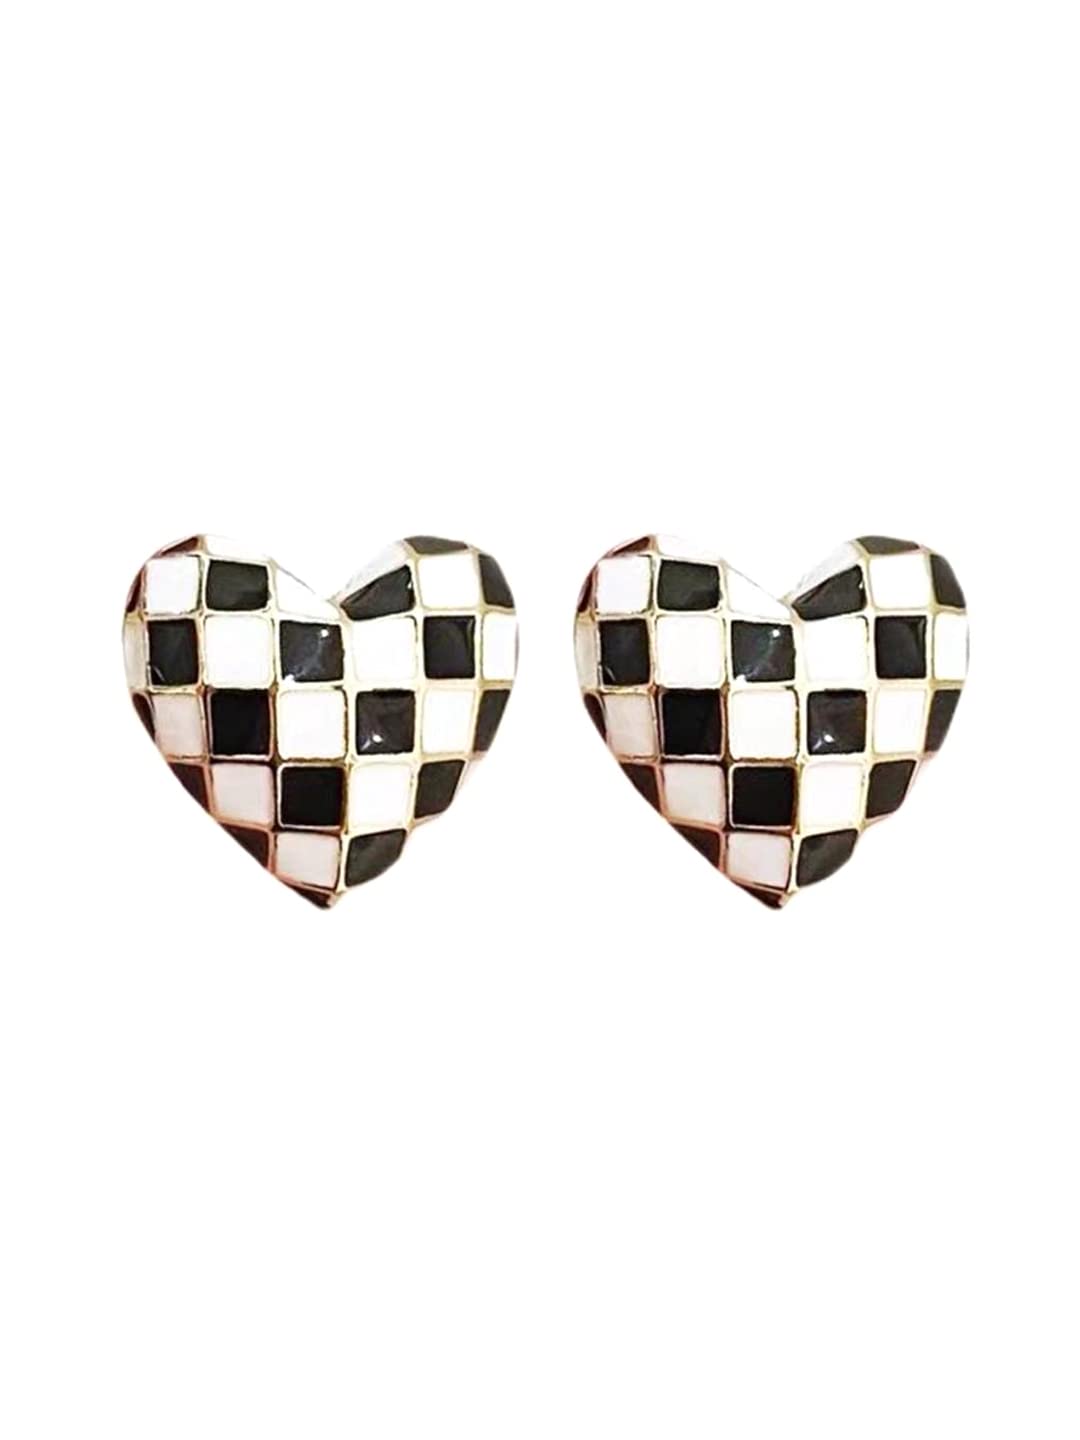 Yellow Chimes Earrings For Women Black and White Heart Shaped Stud Earrings For Women and Girls